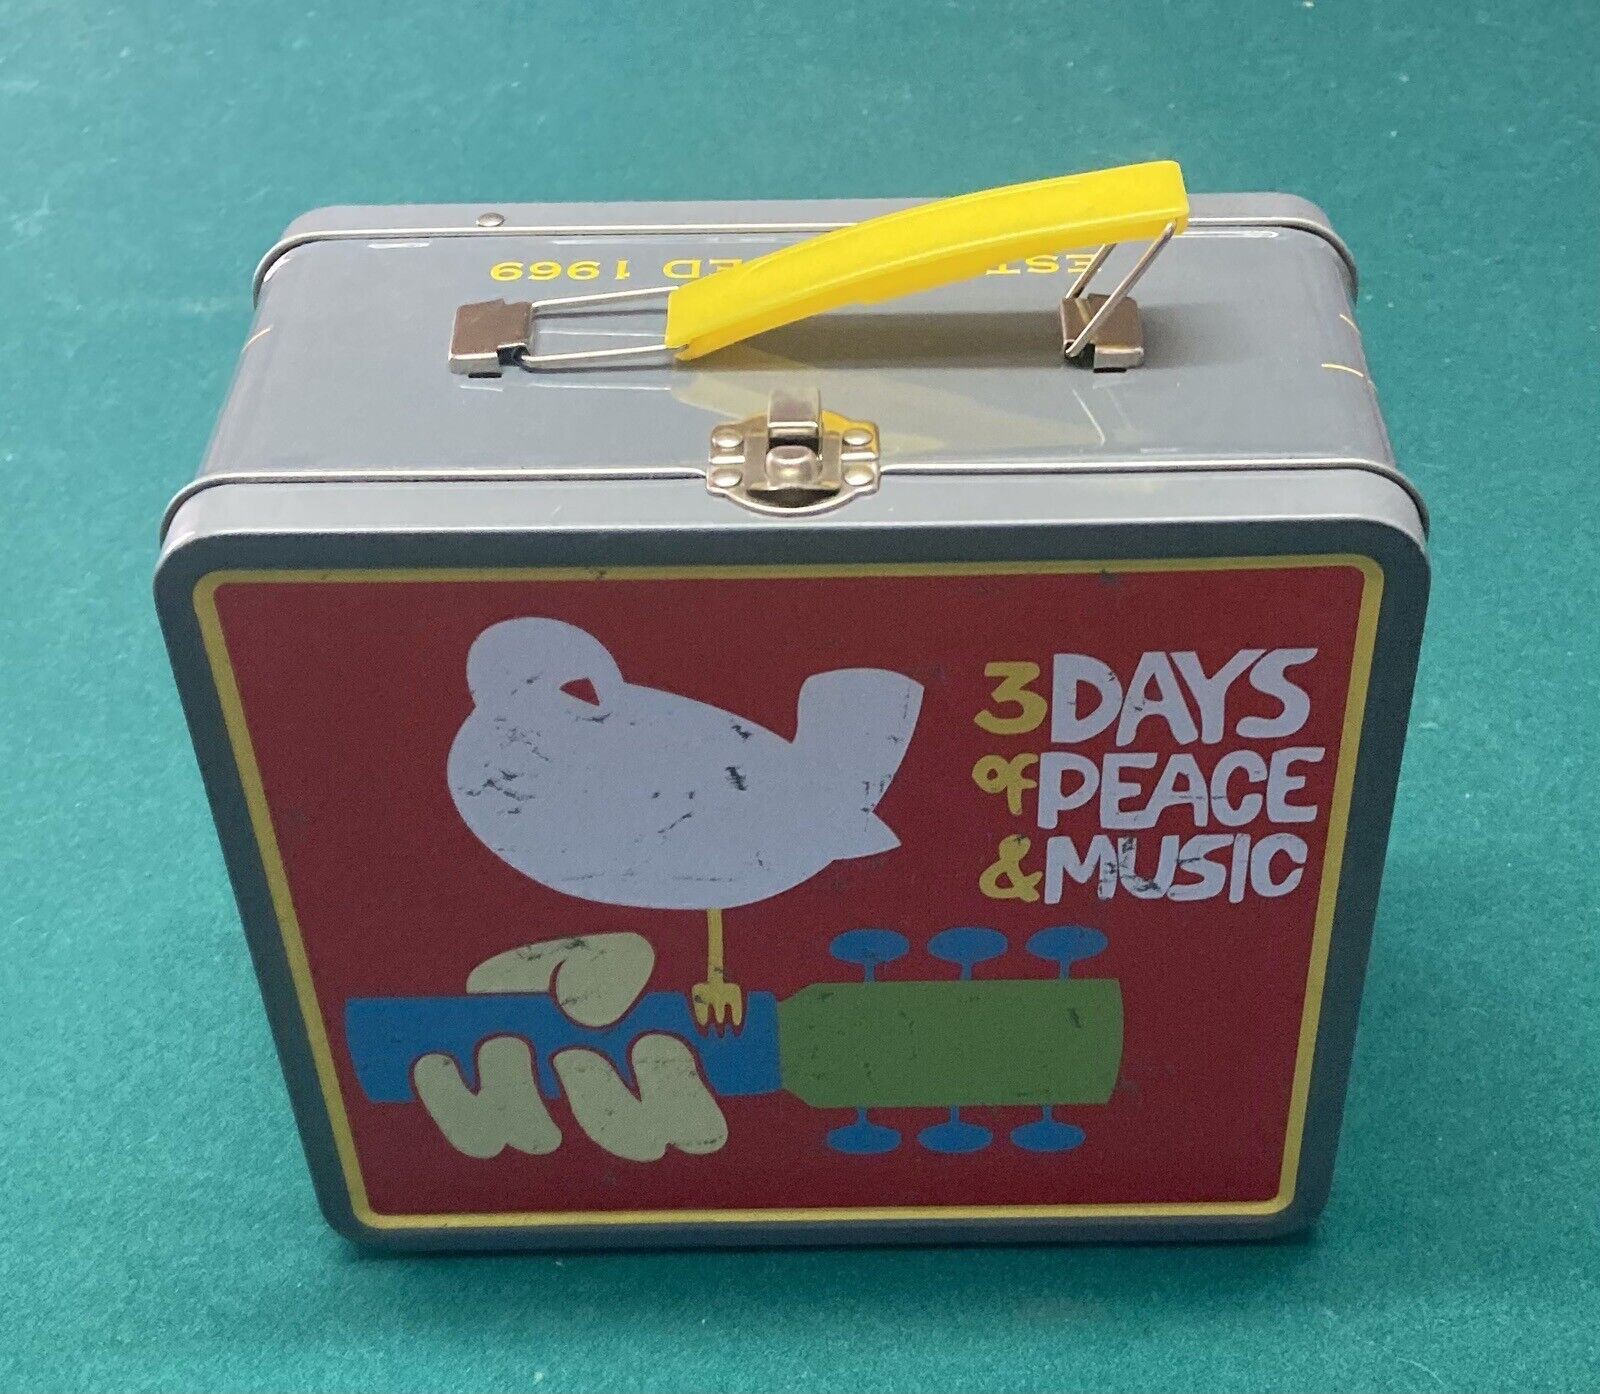 Vintage Woodstock 1969 Metal Lunchbox 3 Days of Peace and Music Great Condition